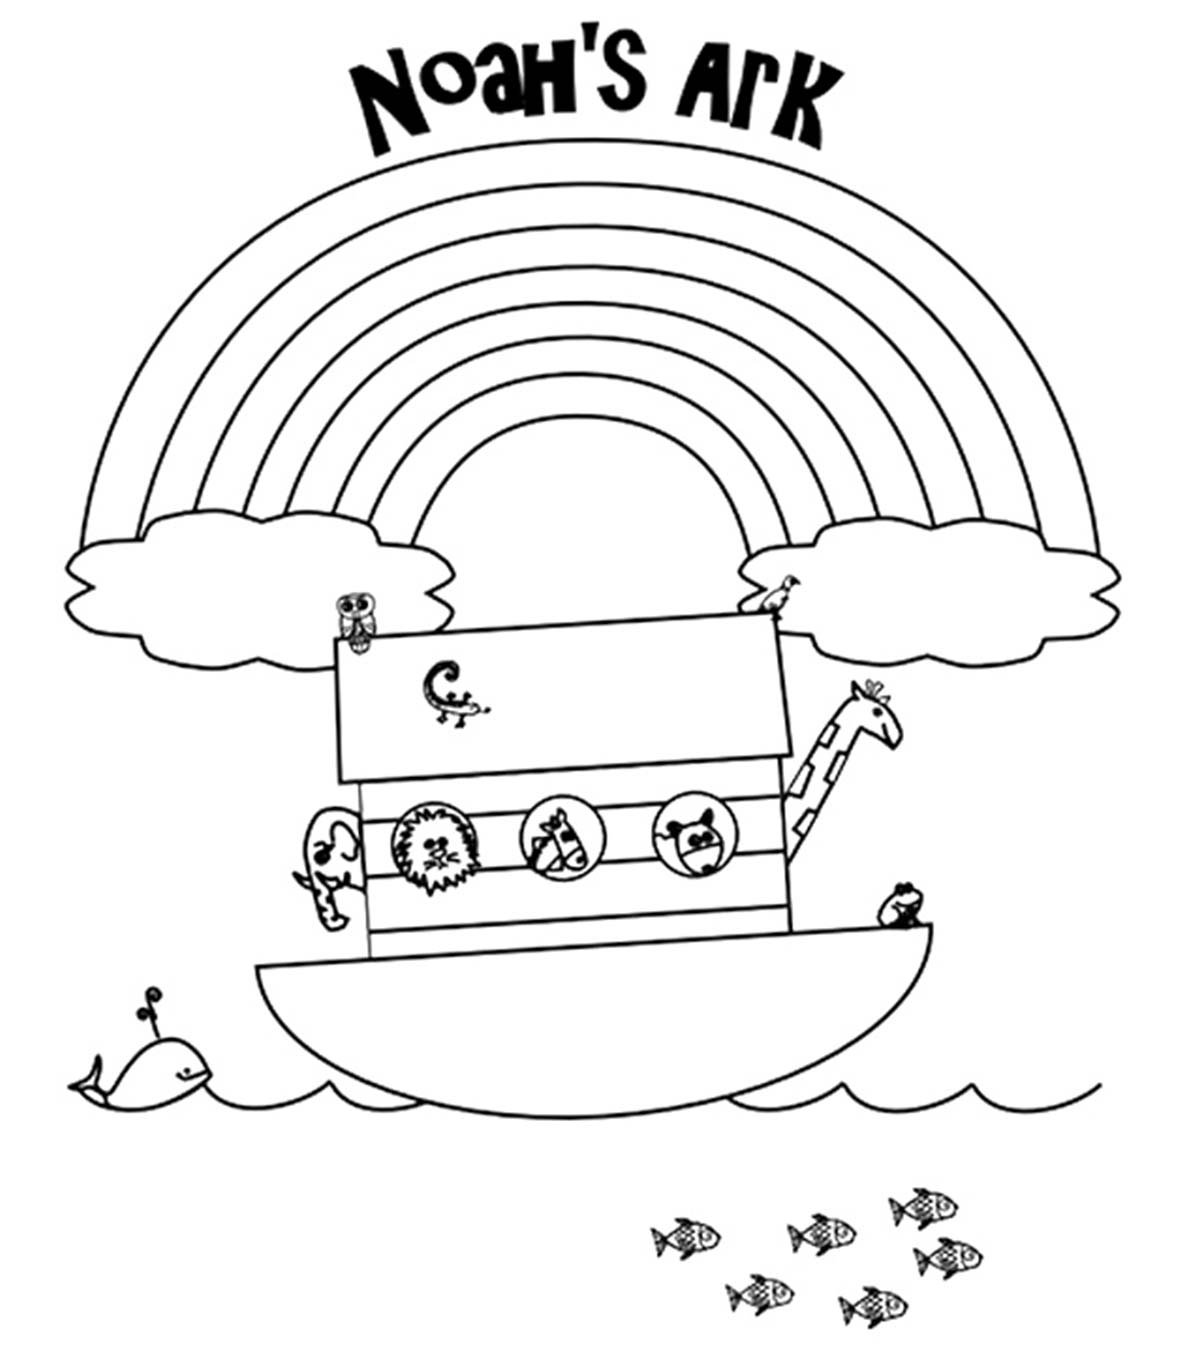 Top 10 Noah And The Ark Coloring Pages Your Toddler Will Love To Color